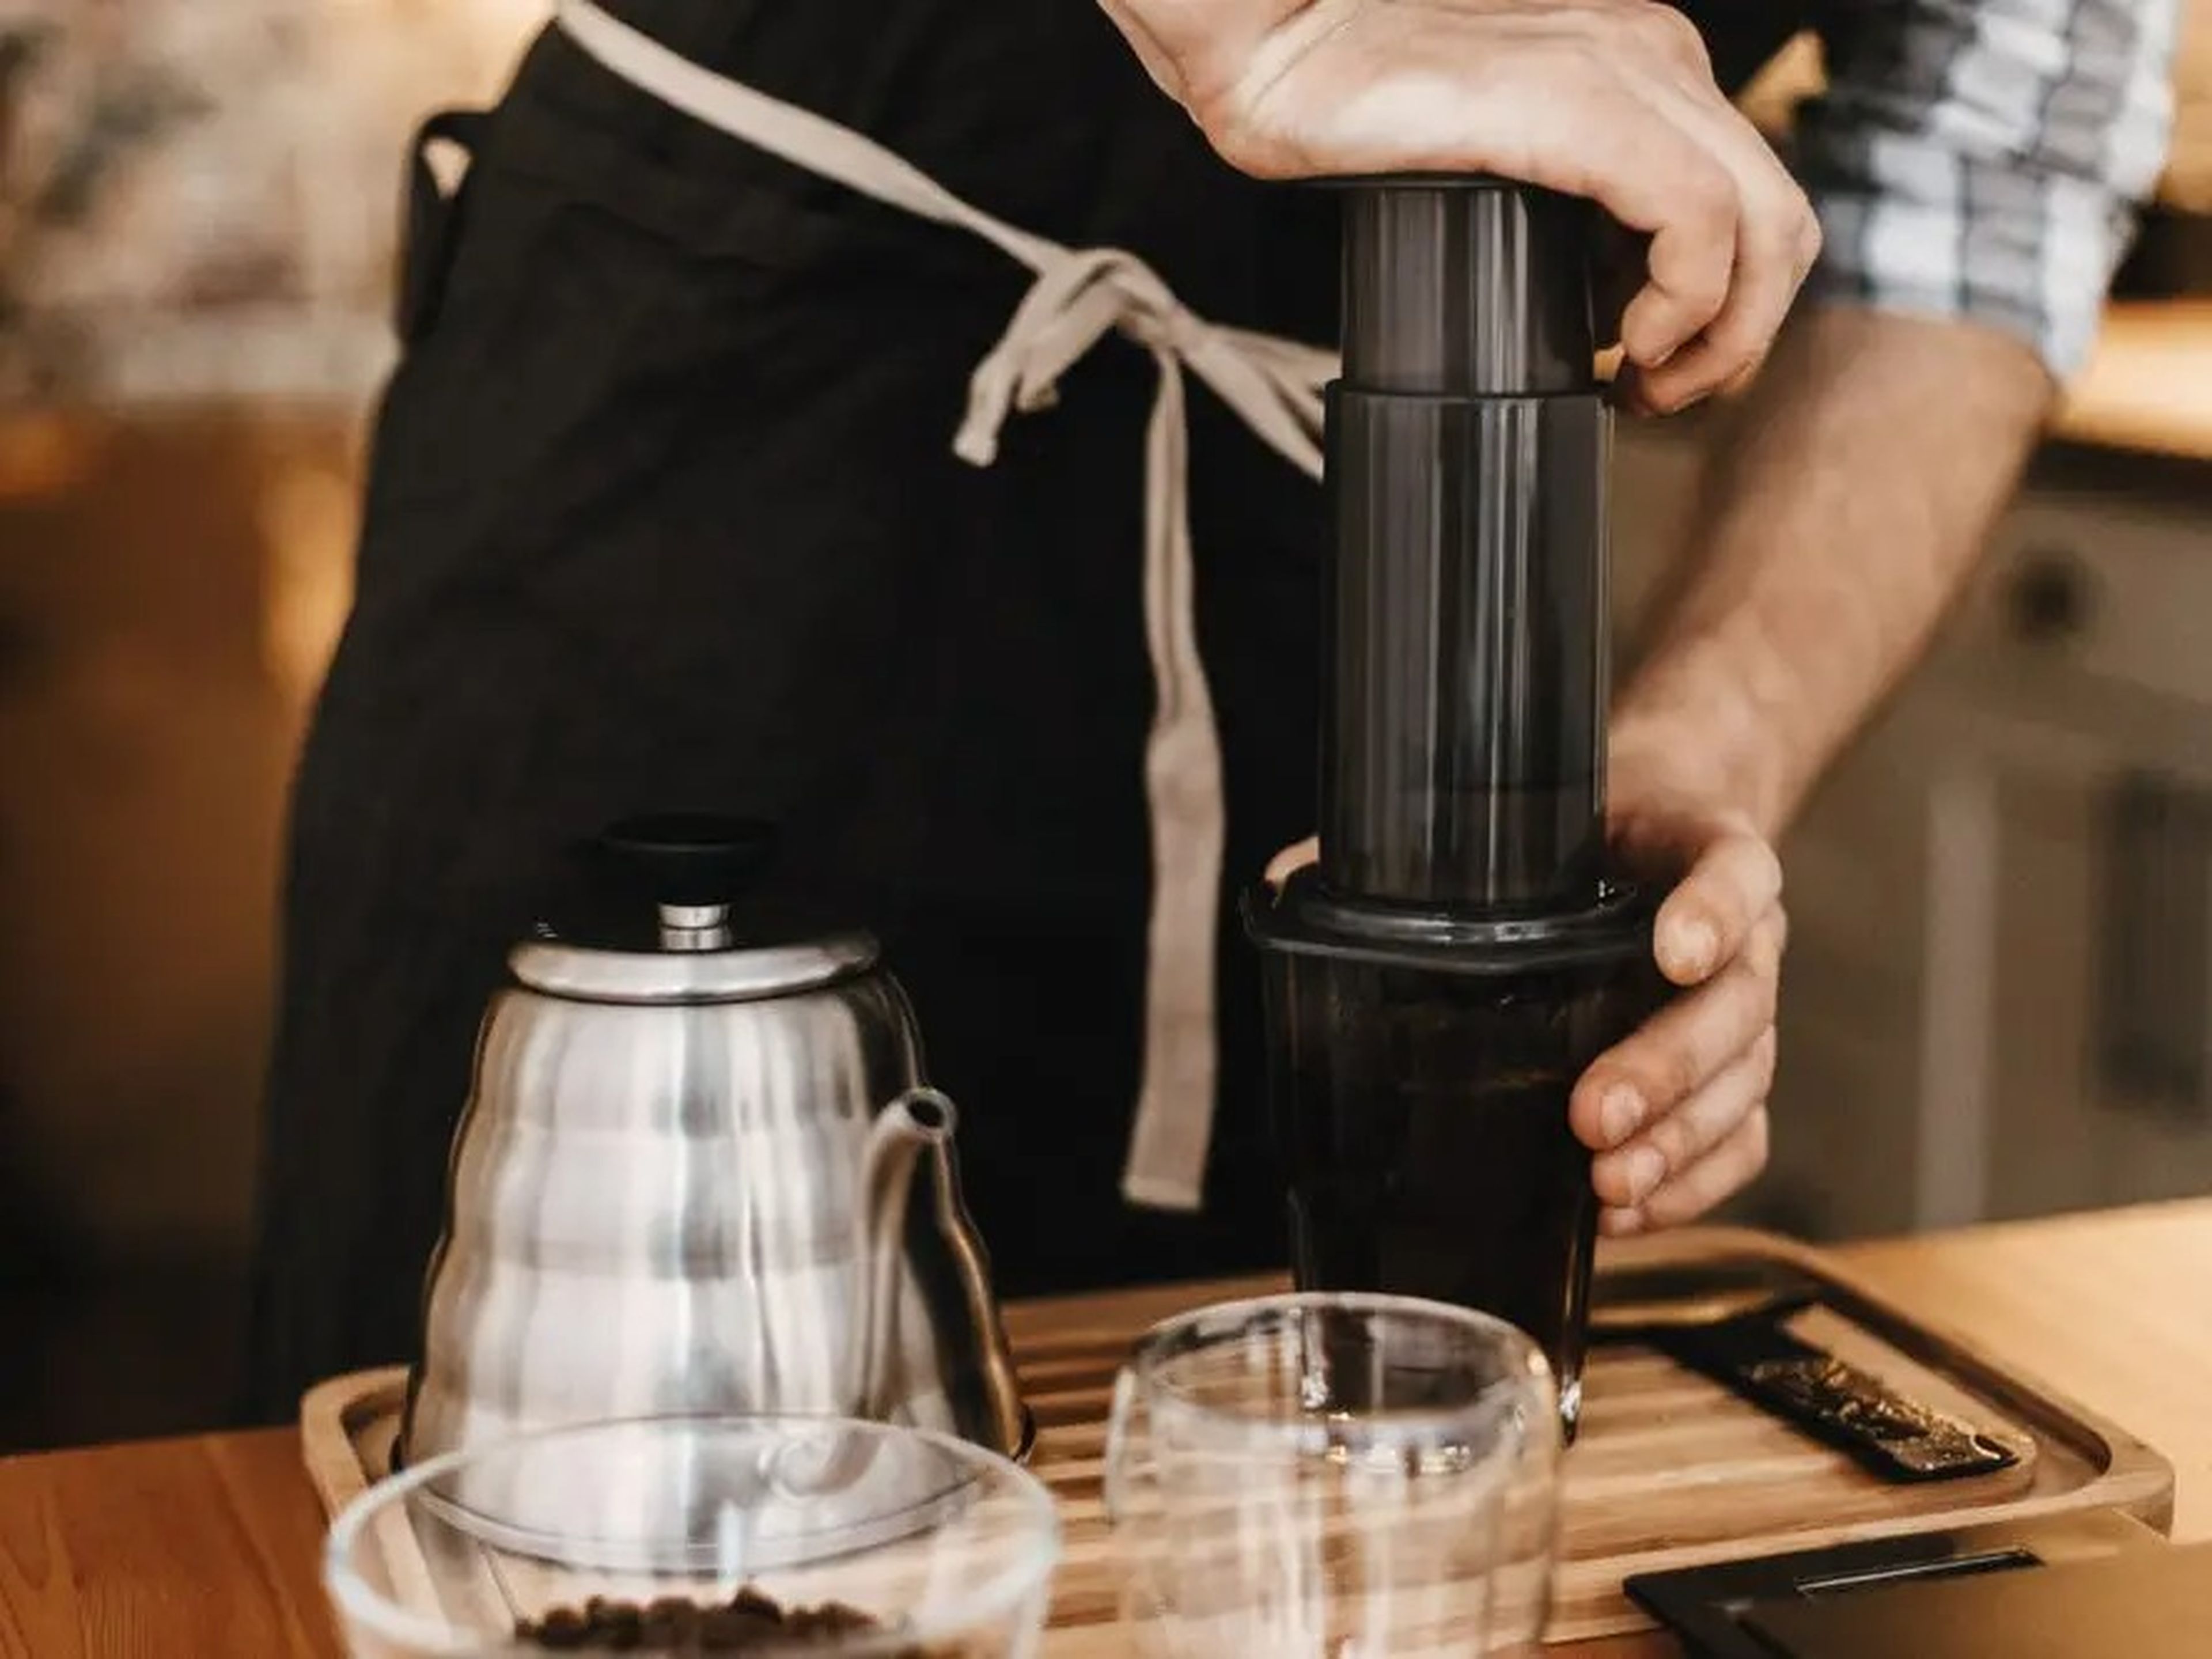 Professional barista preparing coffee by AeroPress and glass cup, scales, manual grinder, coffee beans, kettle on wooden table